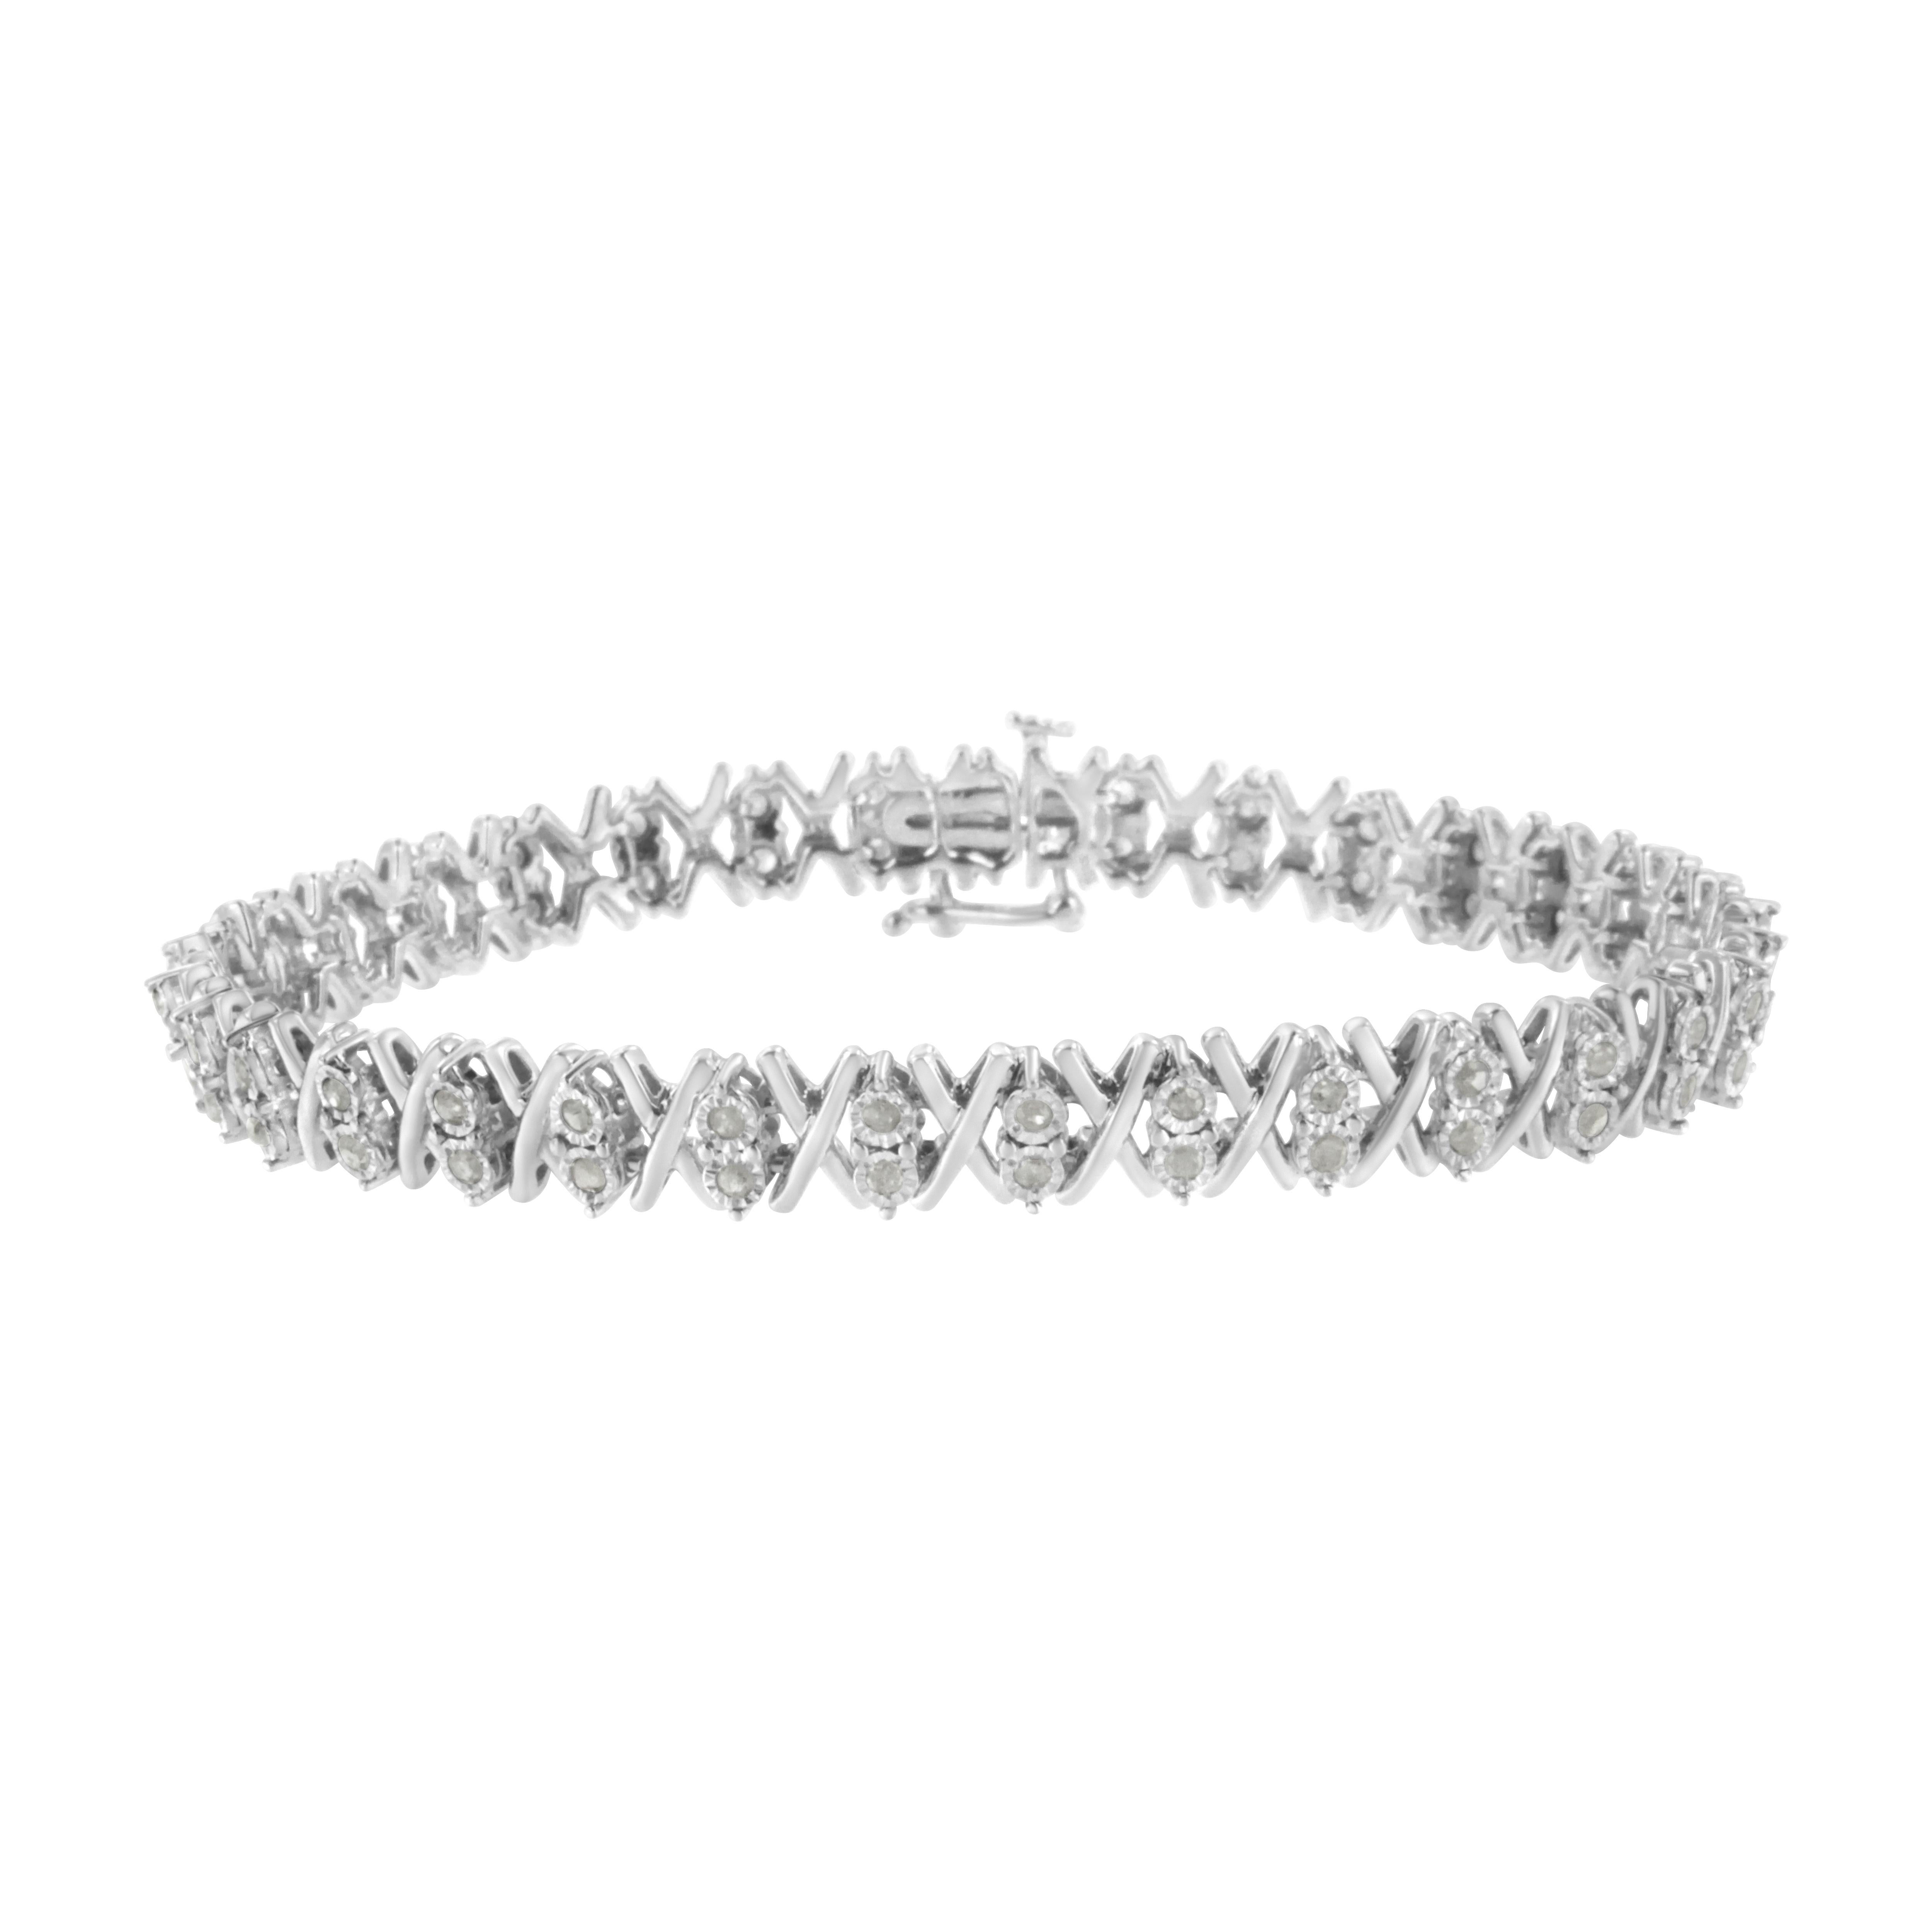 Embellish your wrist with this stunning and unique X tennis bracelet. Fashioned in polished sterling silver this design showcases 1ct TDW of glittering round cut diamonds. Carefully crafted X links alternate with miracle set diamonds throughout the